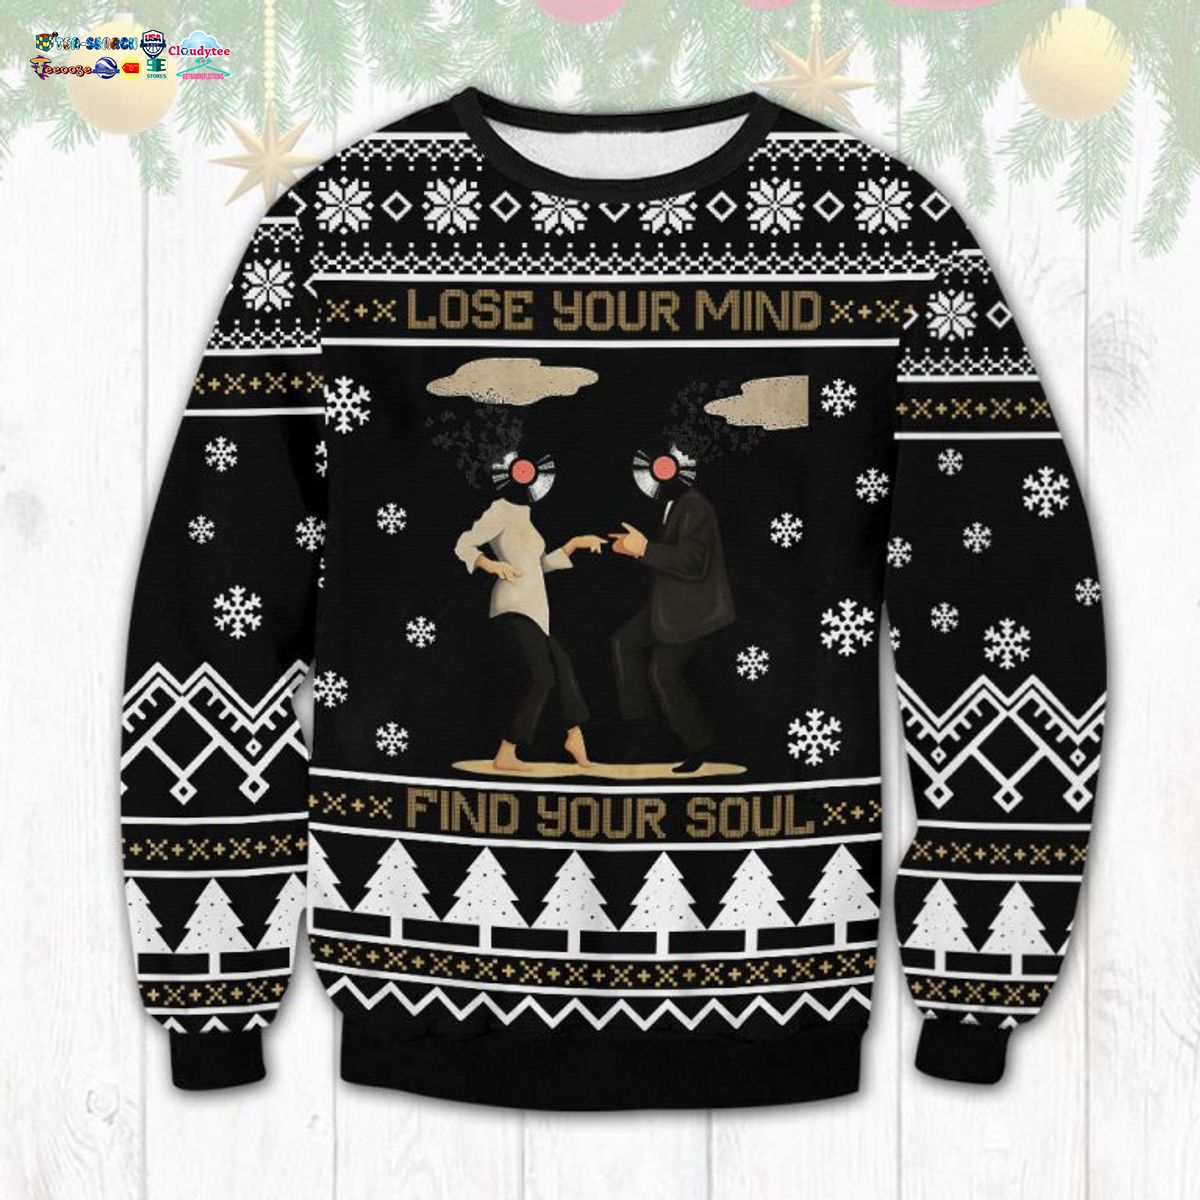 Pulp Fiction Lose Your Mind Find Your Soul Ugly Christmas Sweater